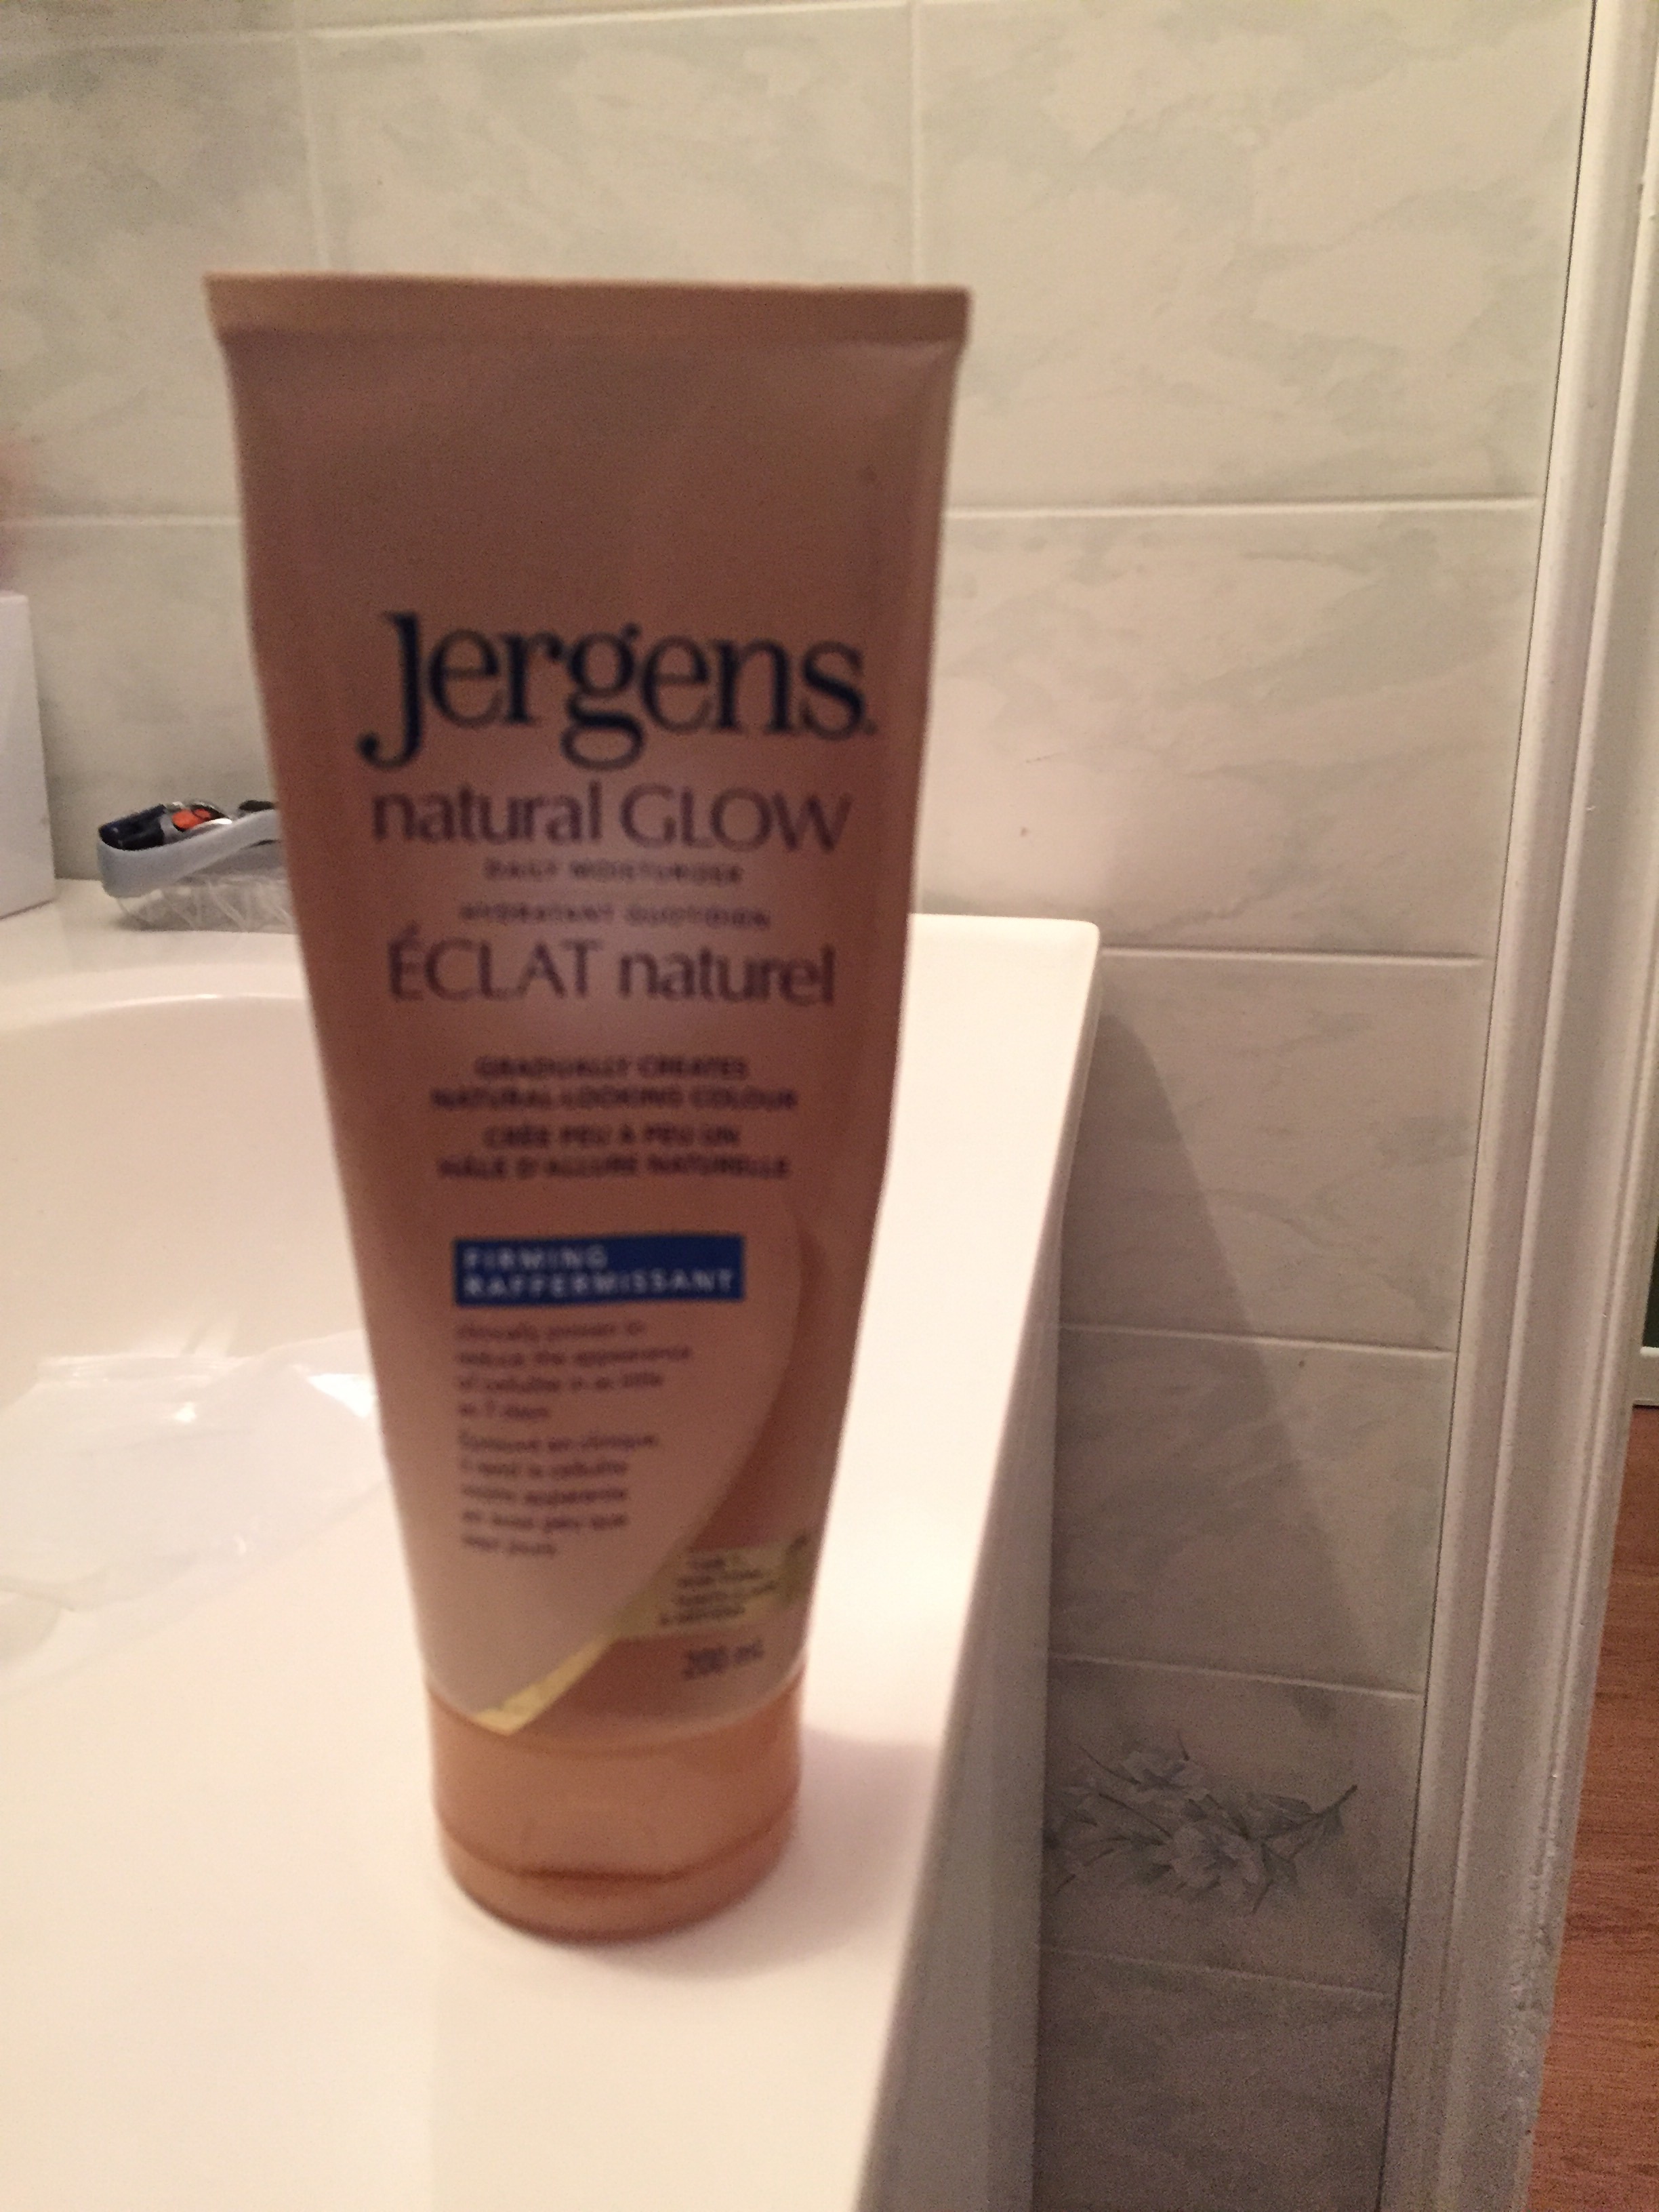 jergens natural glow instructions